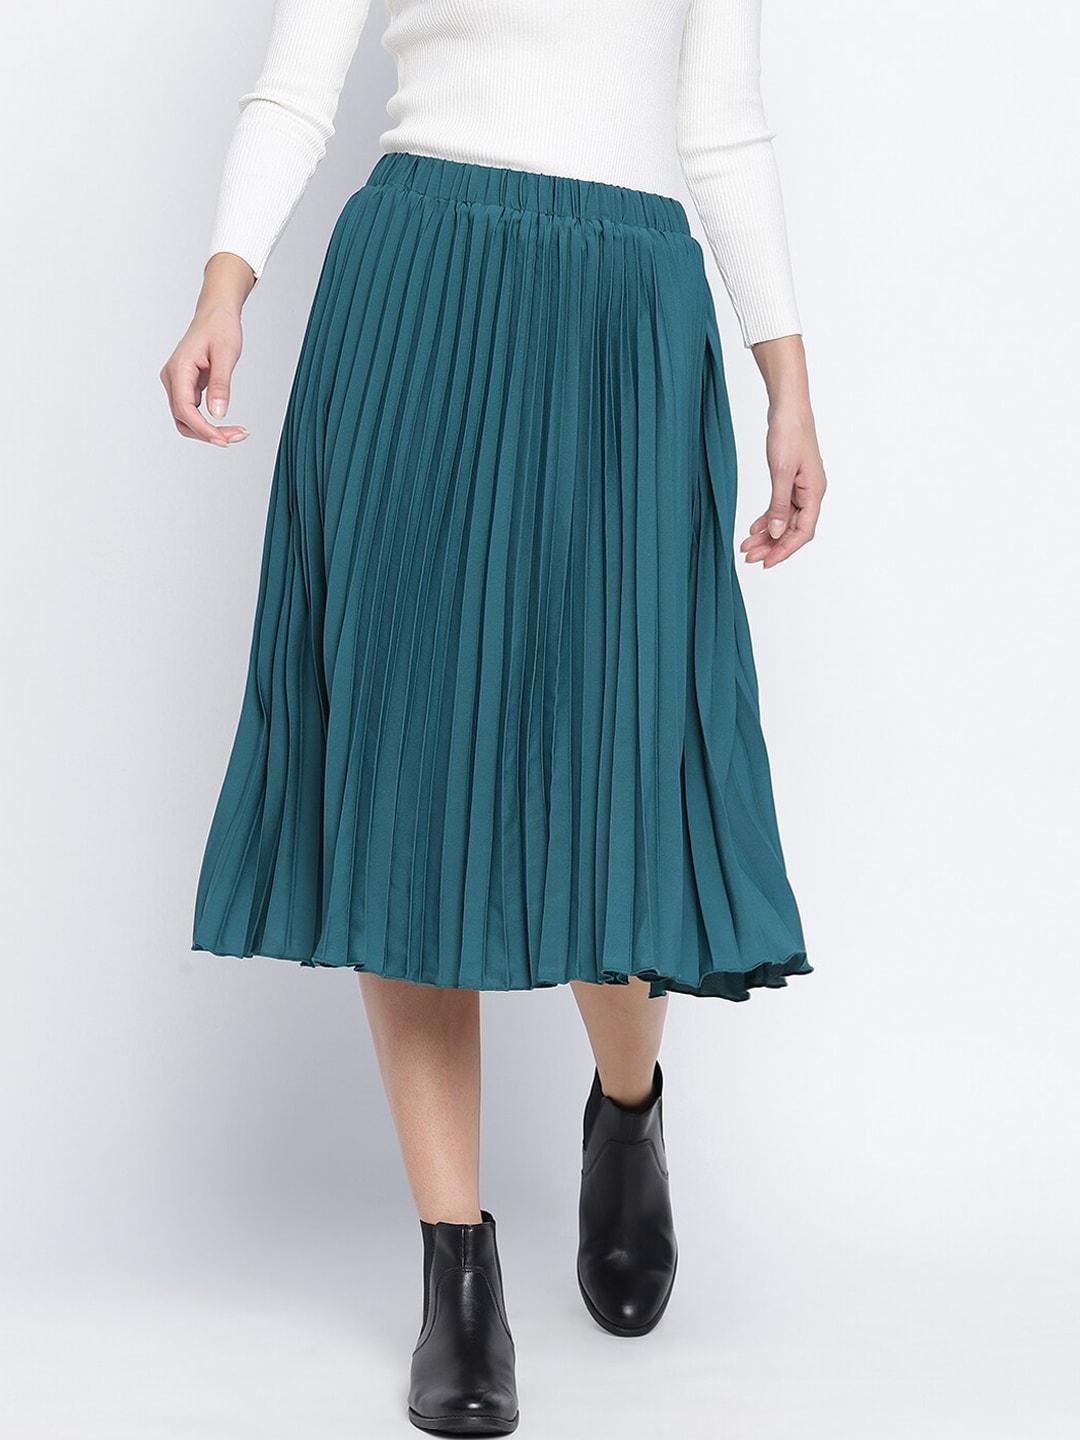 oxolloxo-women-teal-green-coloured-solid-midi-length-pleated-skirt